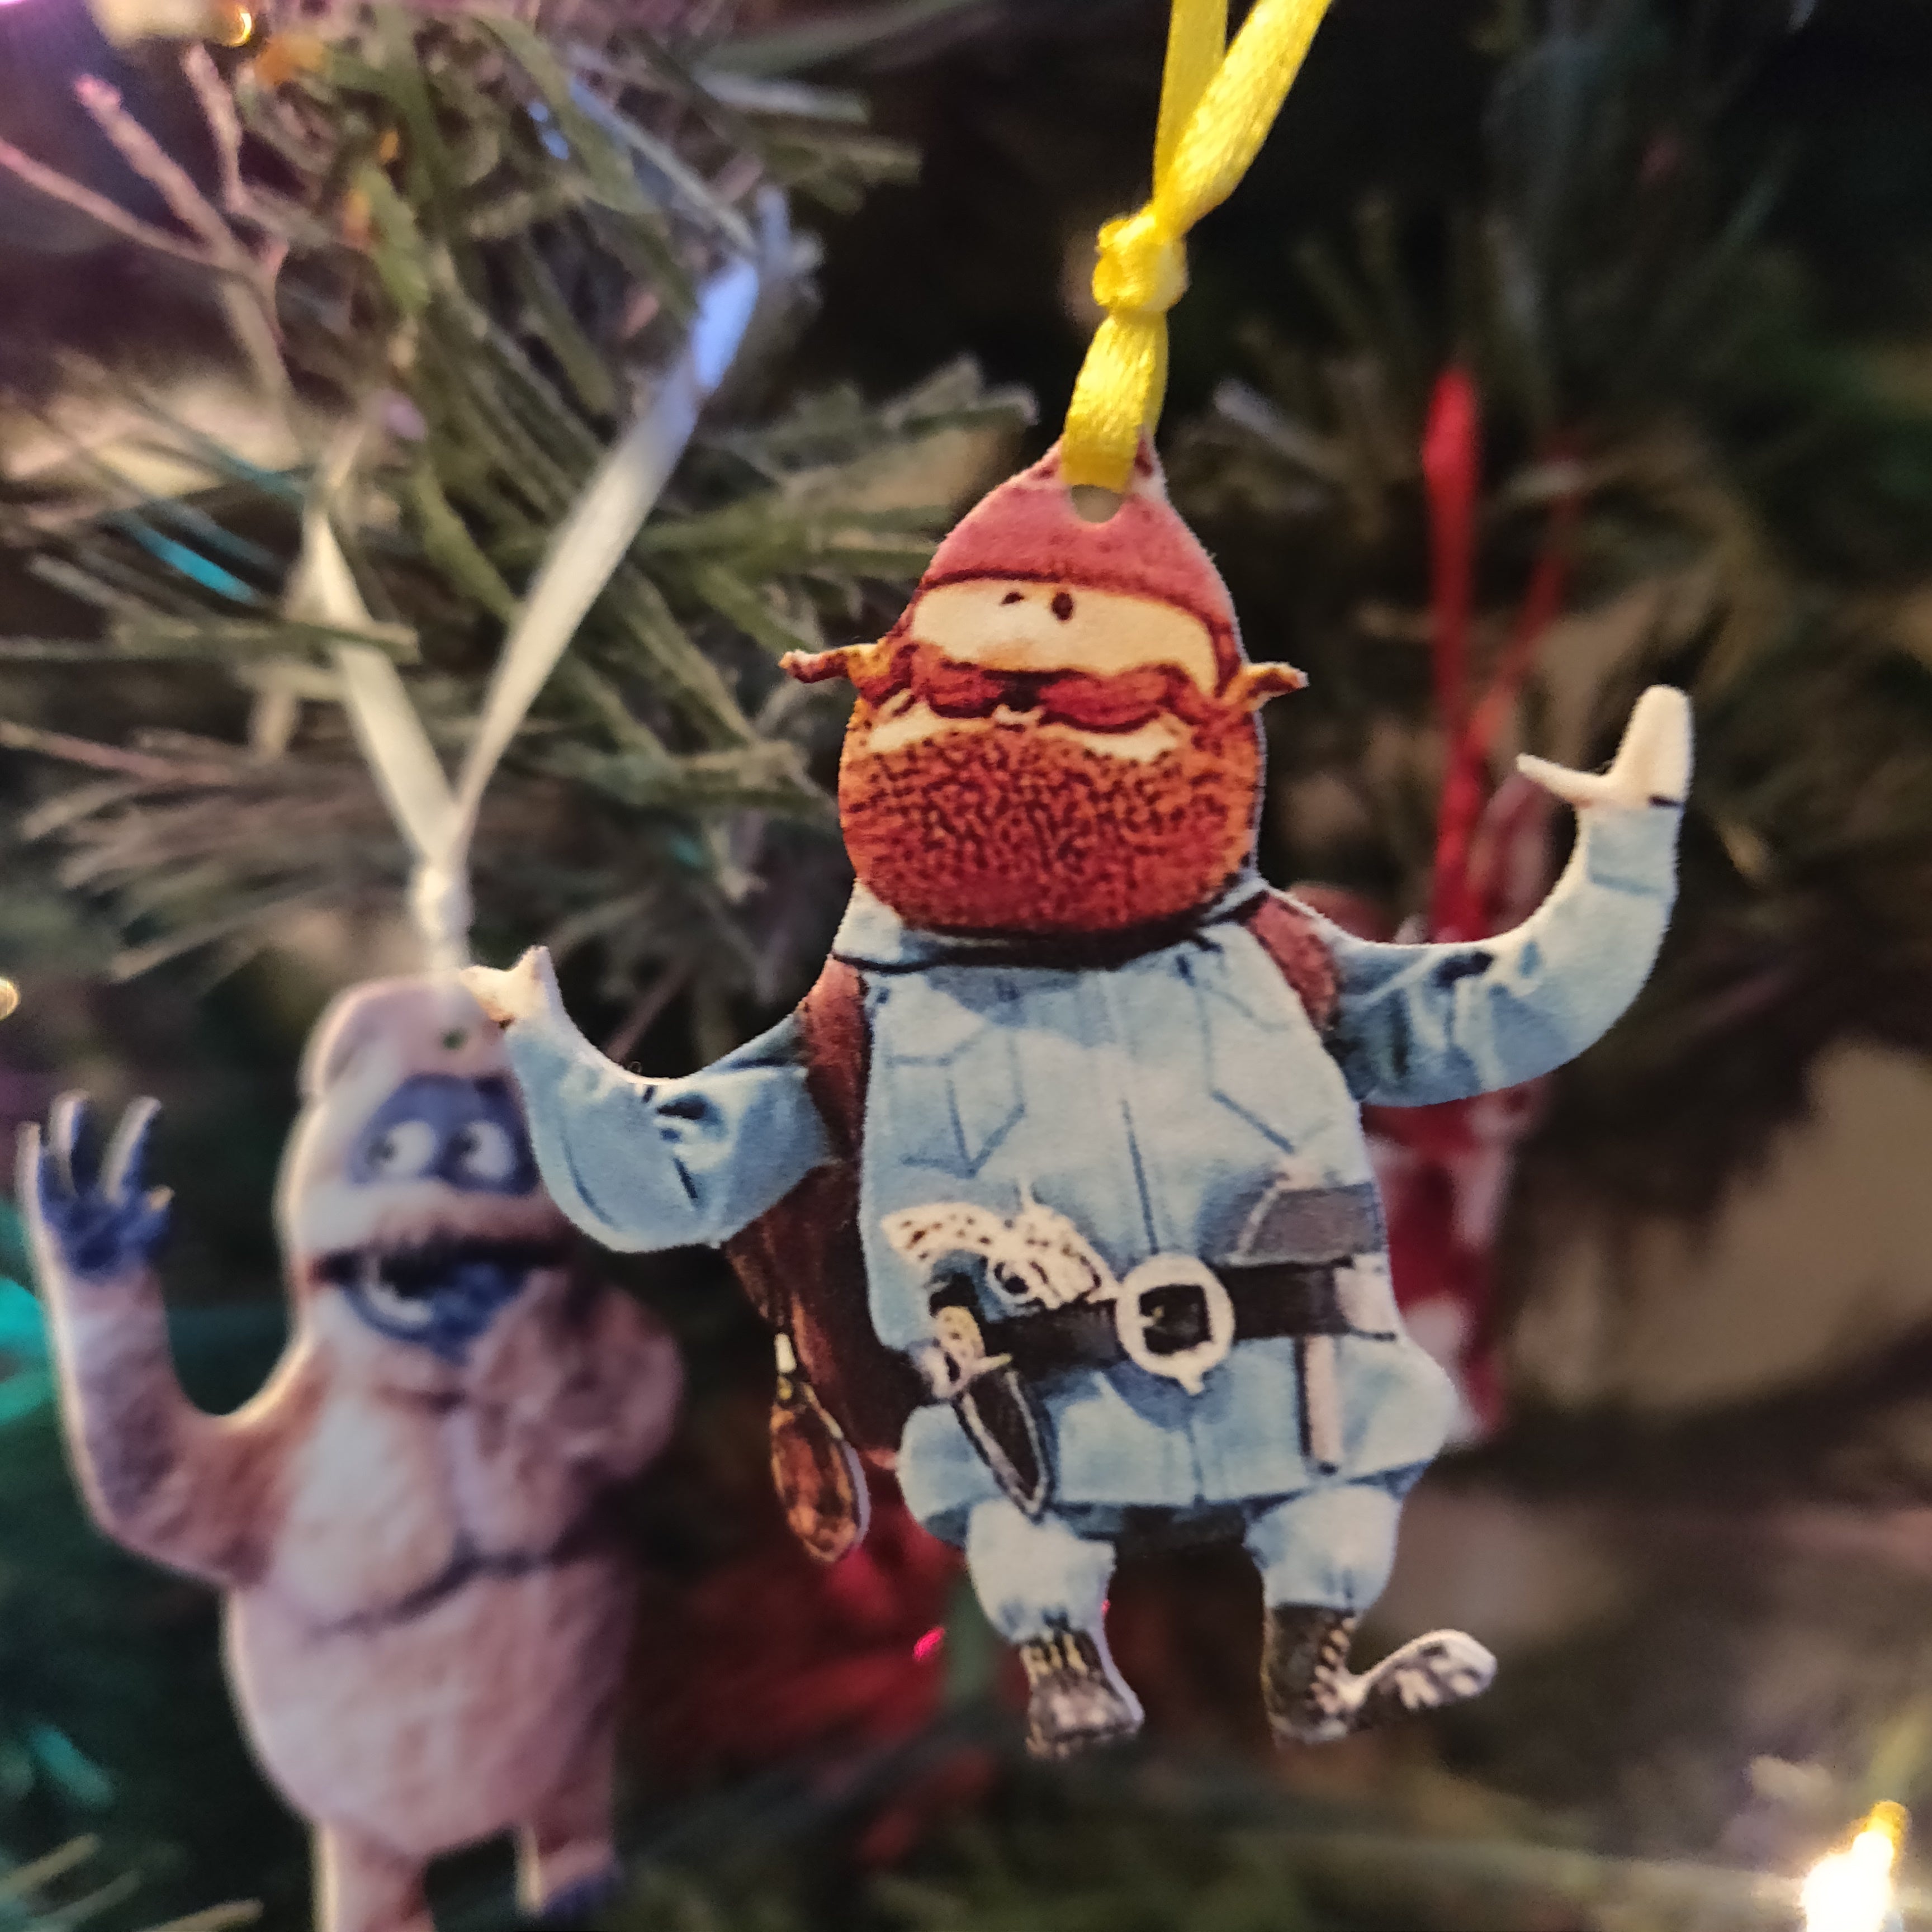 Rudolph & Island of Misfit Toys ORNAMENTS